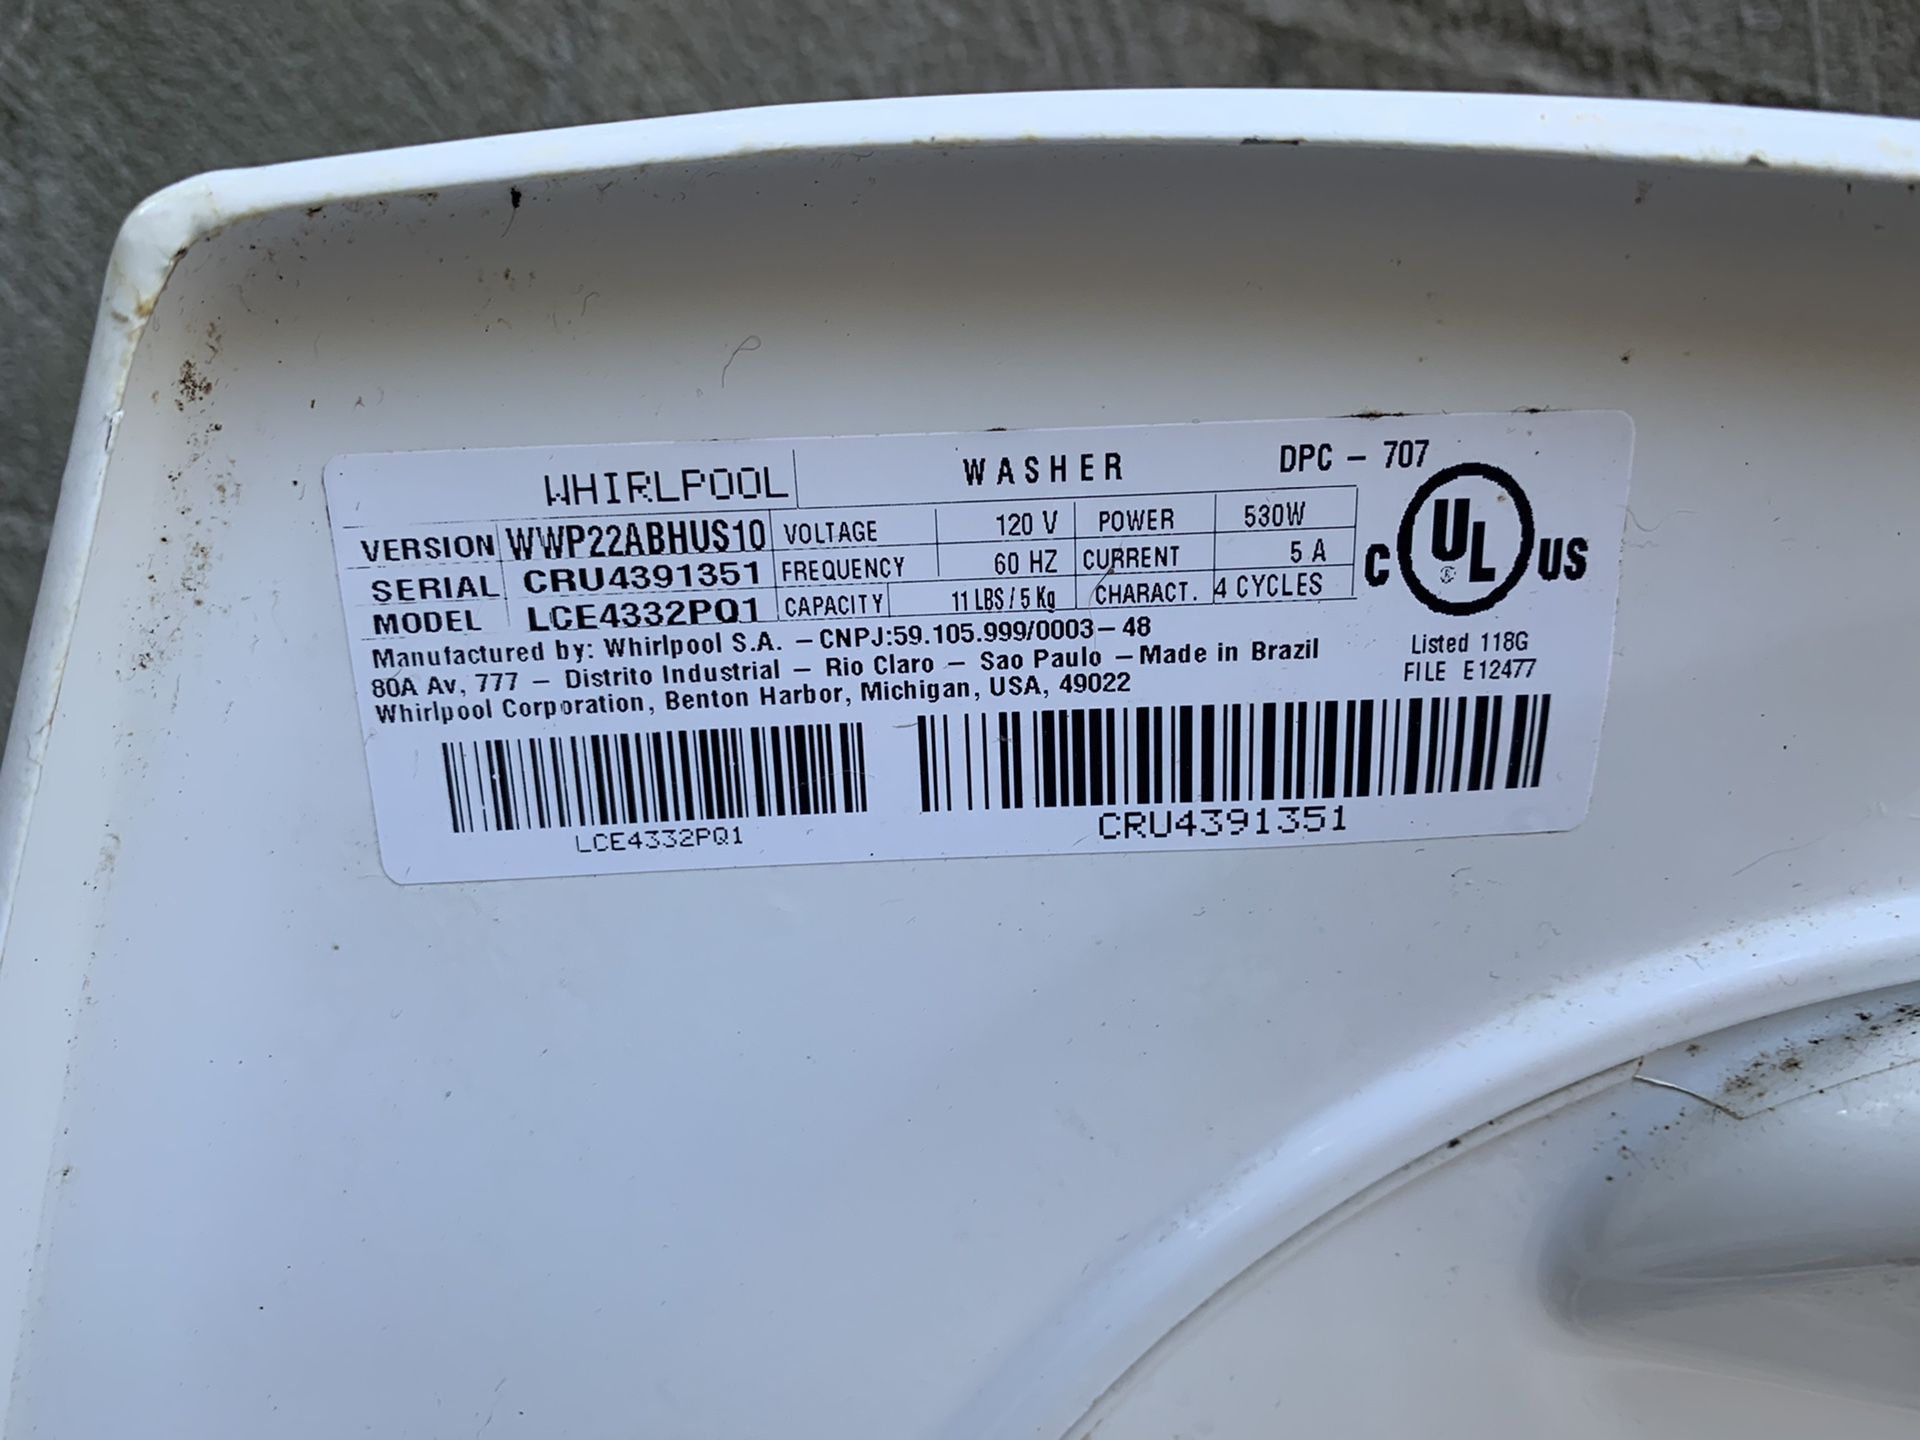 Whirlpool 4KFP710WH2 Parts List